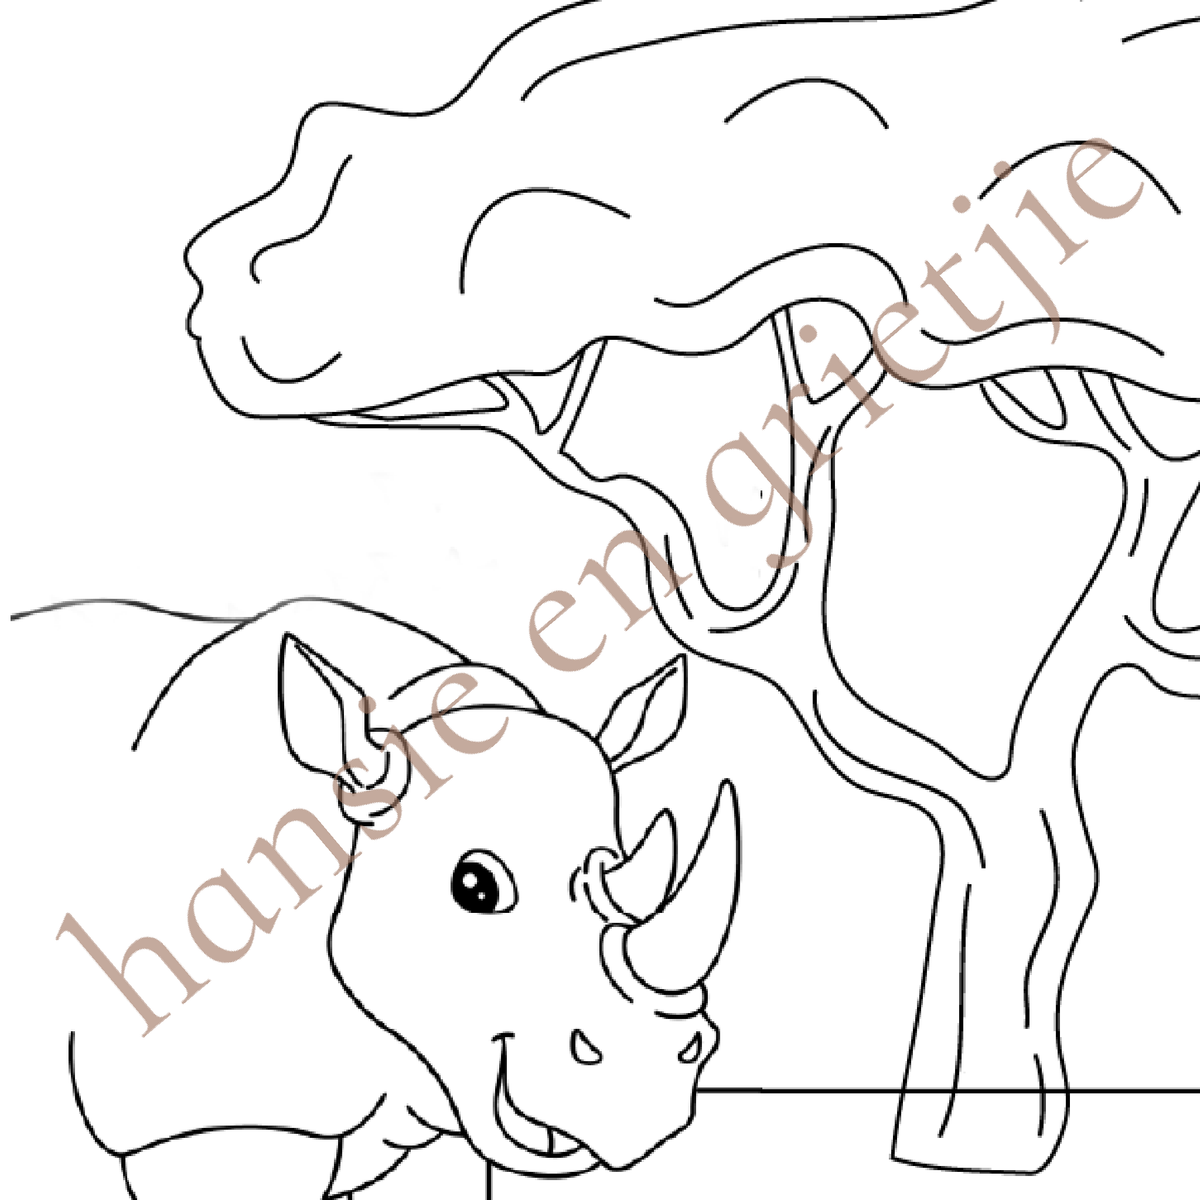 Hansie en Grietjie 'Africa's Threatened Colouring Book for Kids' featuring a rhino design, promoting conservation awareness in Africa.